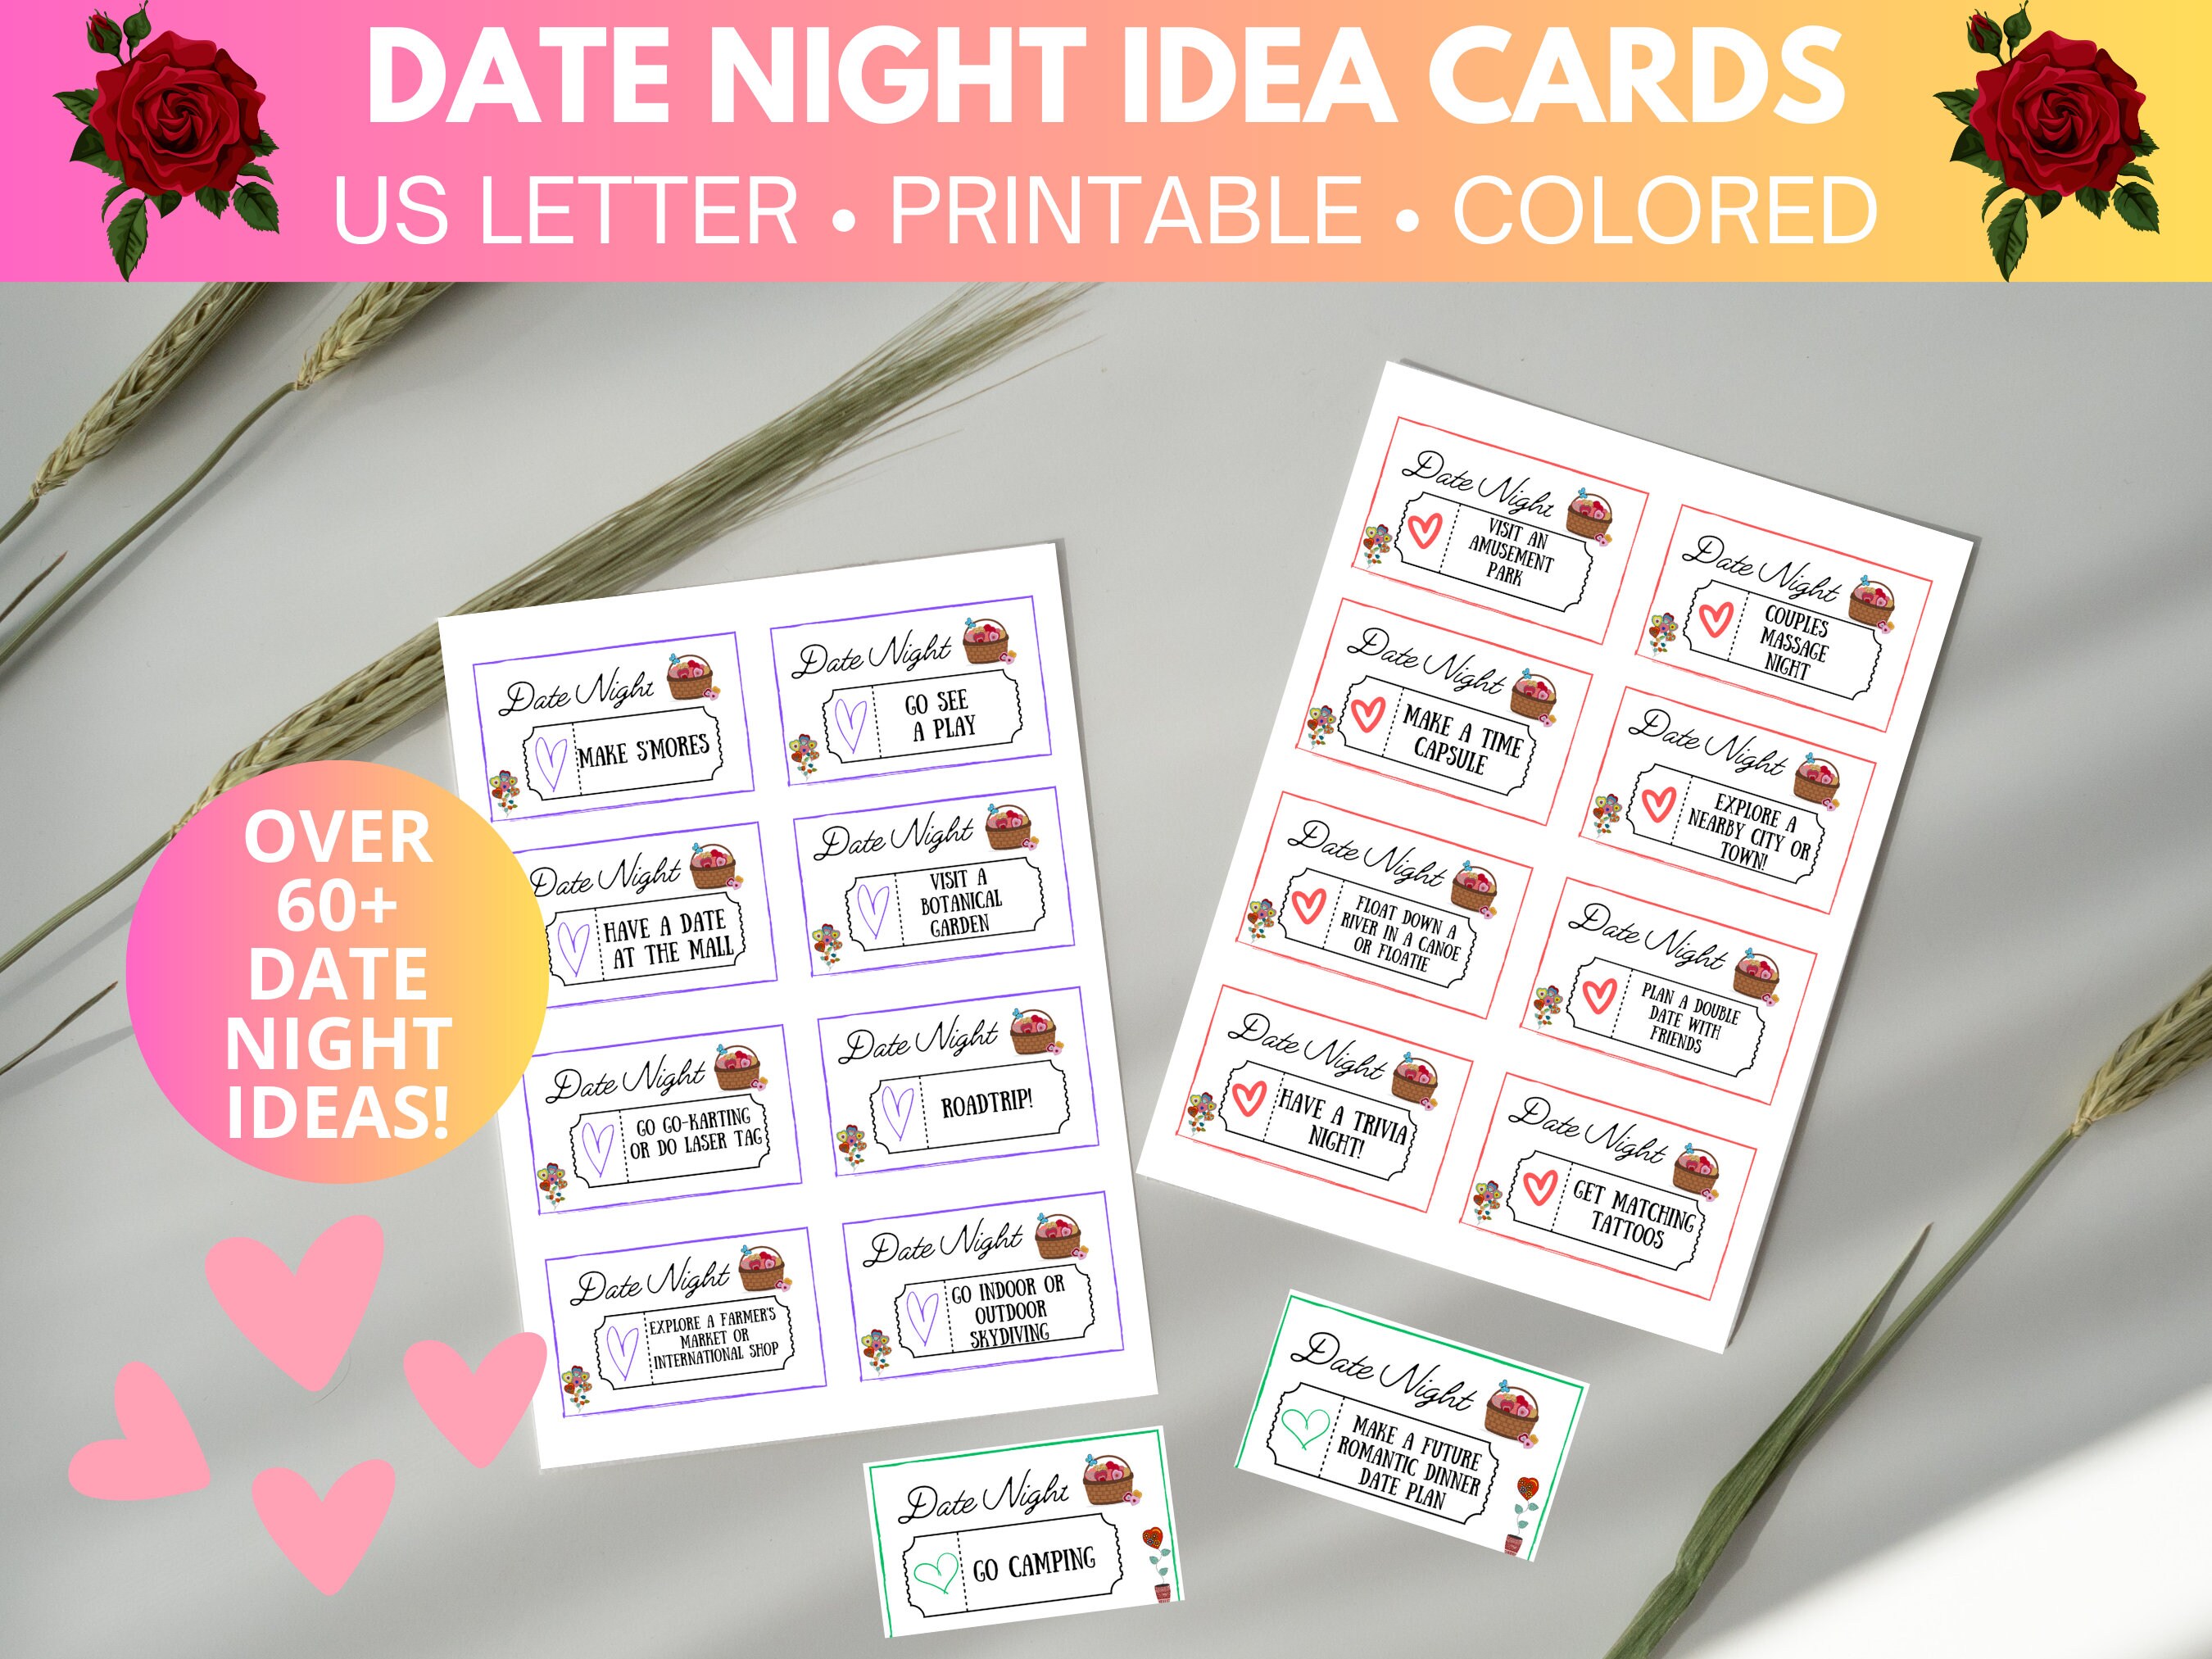 94 Date Night Ideas to Add to Your Date Jar - Free Printable List